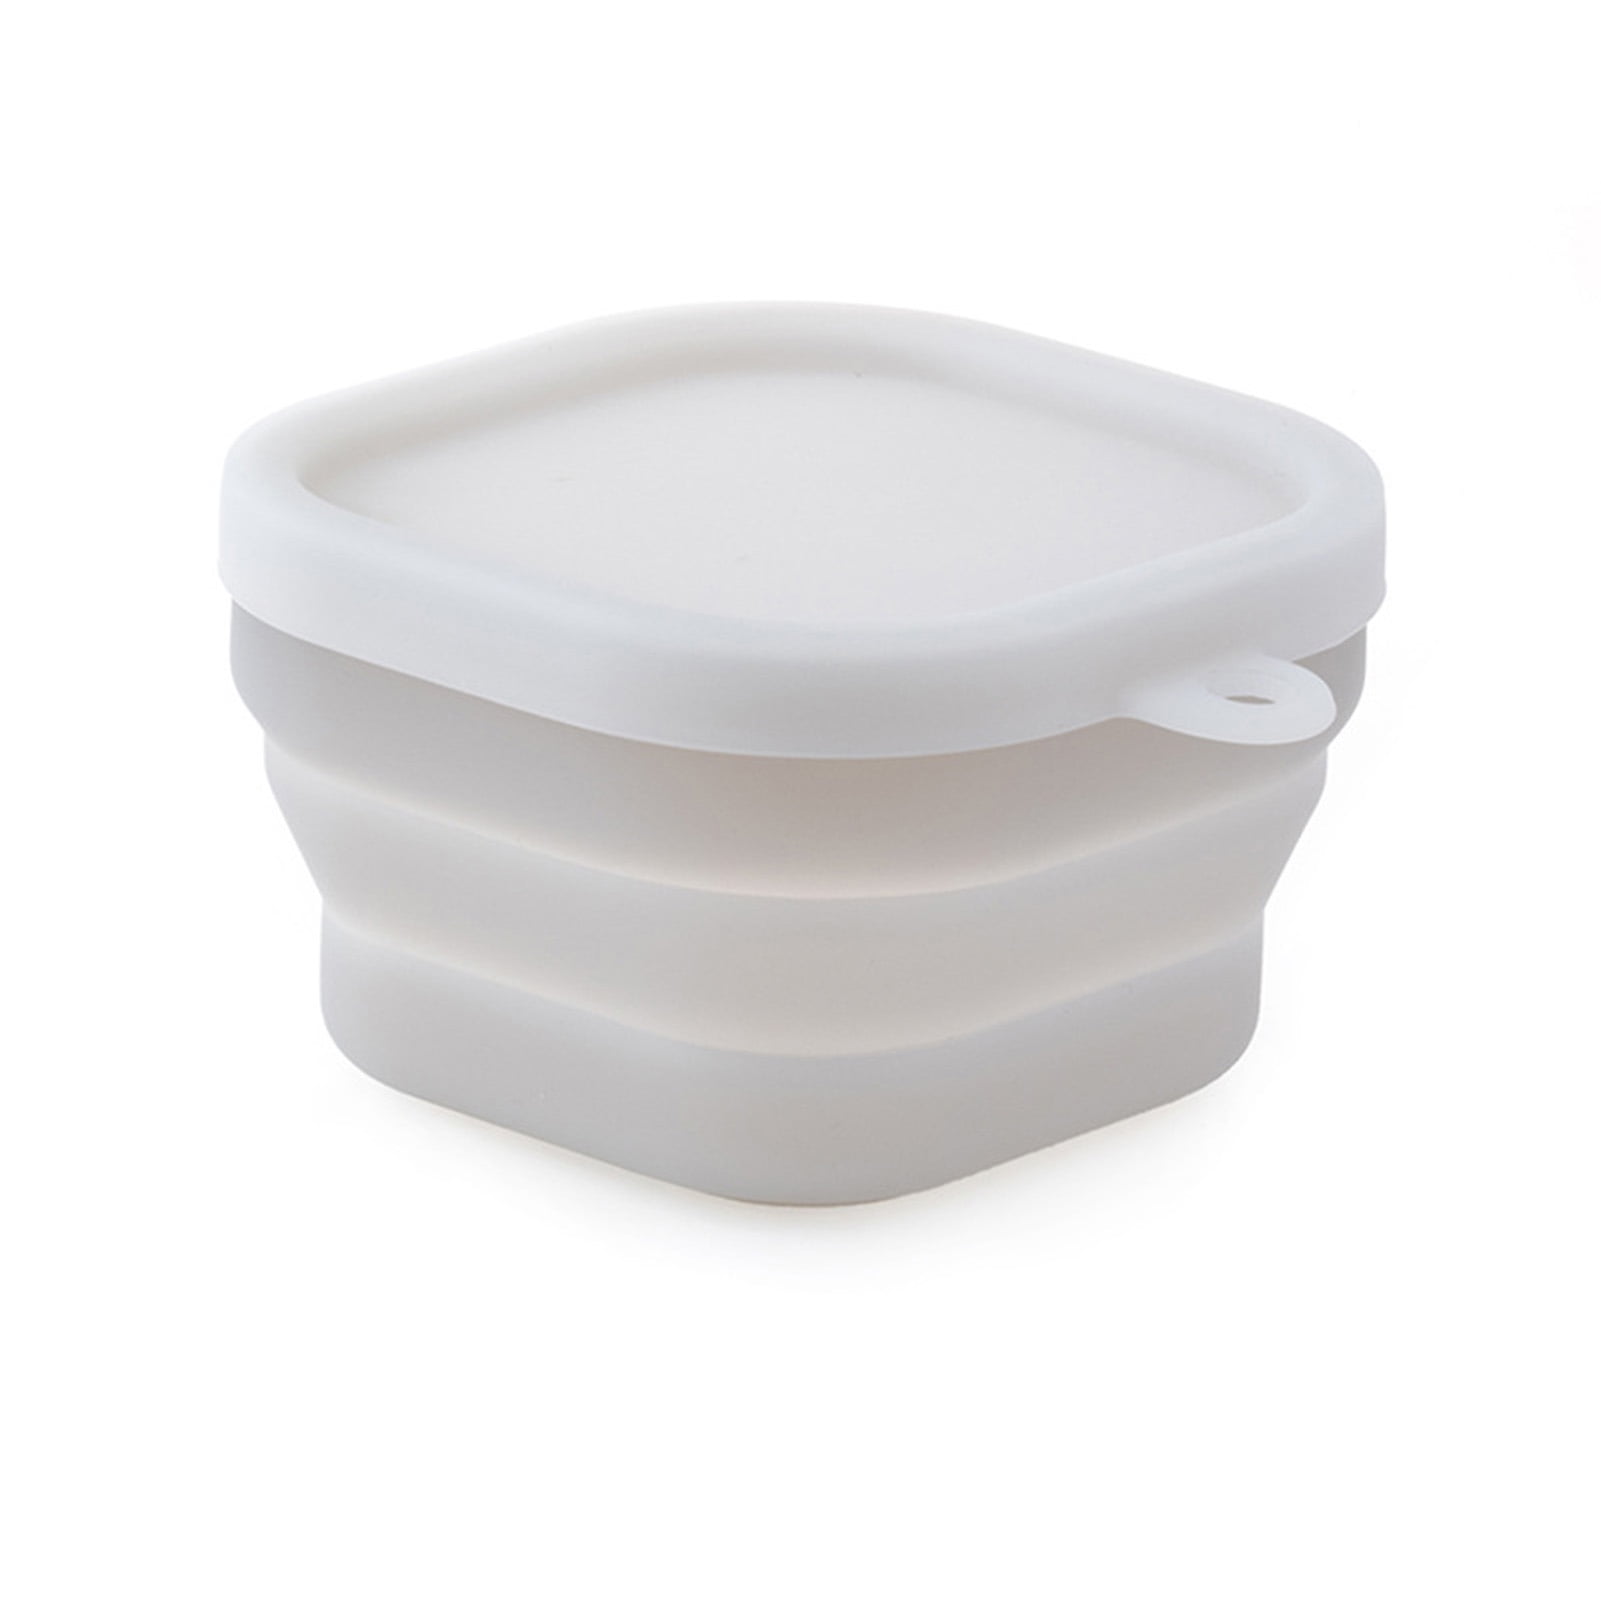  Chubacoo Ceramic Bowl with Lid: Soup Bowls with Lids Microwave  Safe - Food Prep Bowls with Lids - Salad Bowls Set of 4 for Picnic, Camping  - Lunch Containers with Lid 